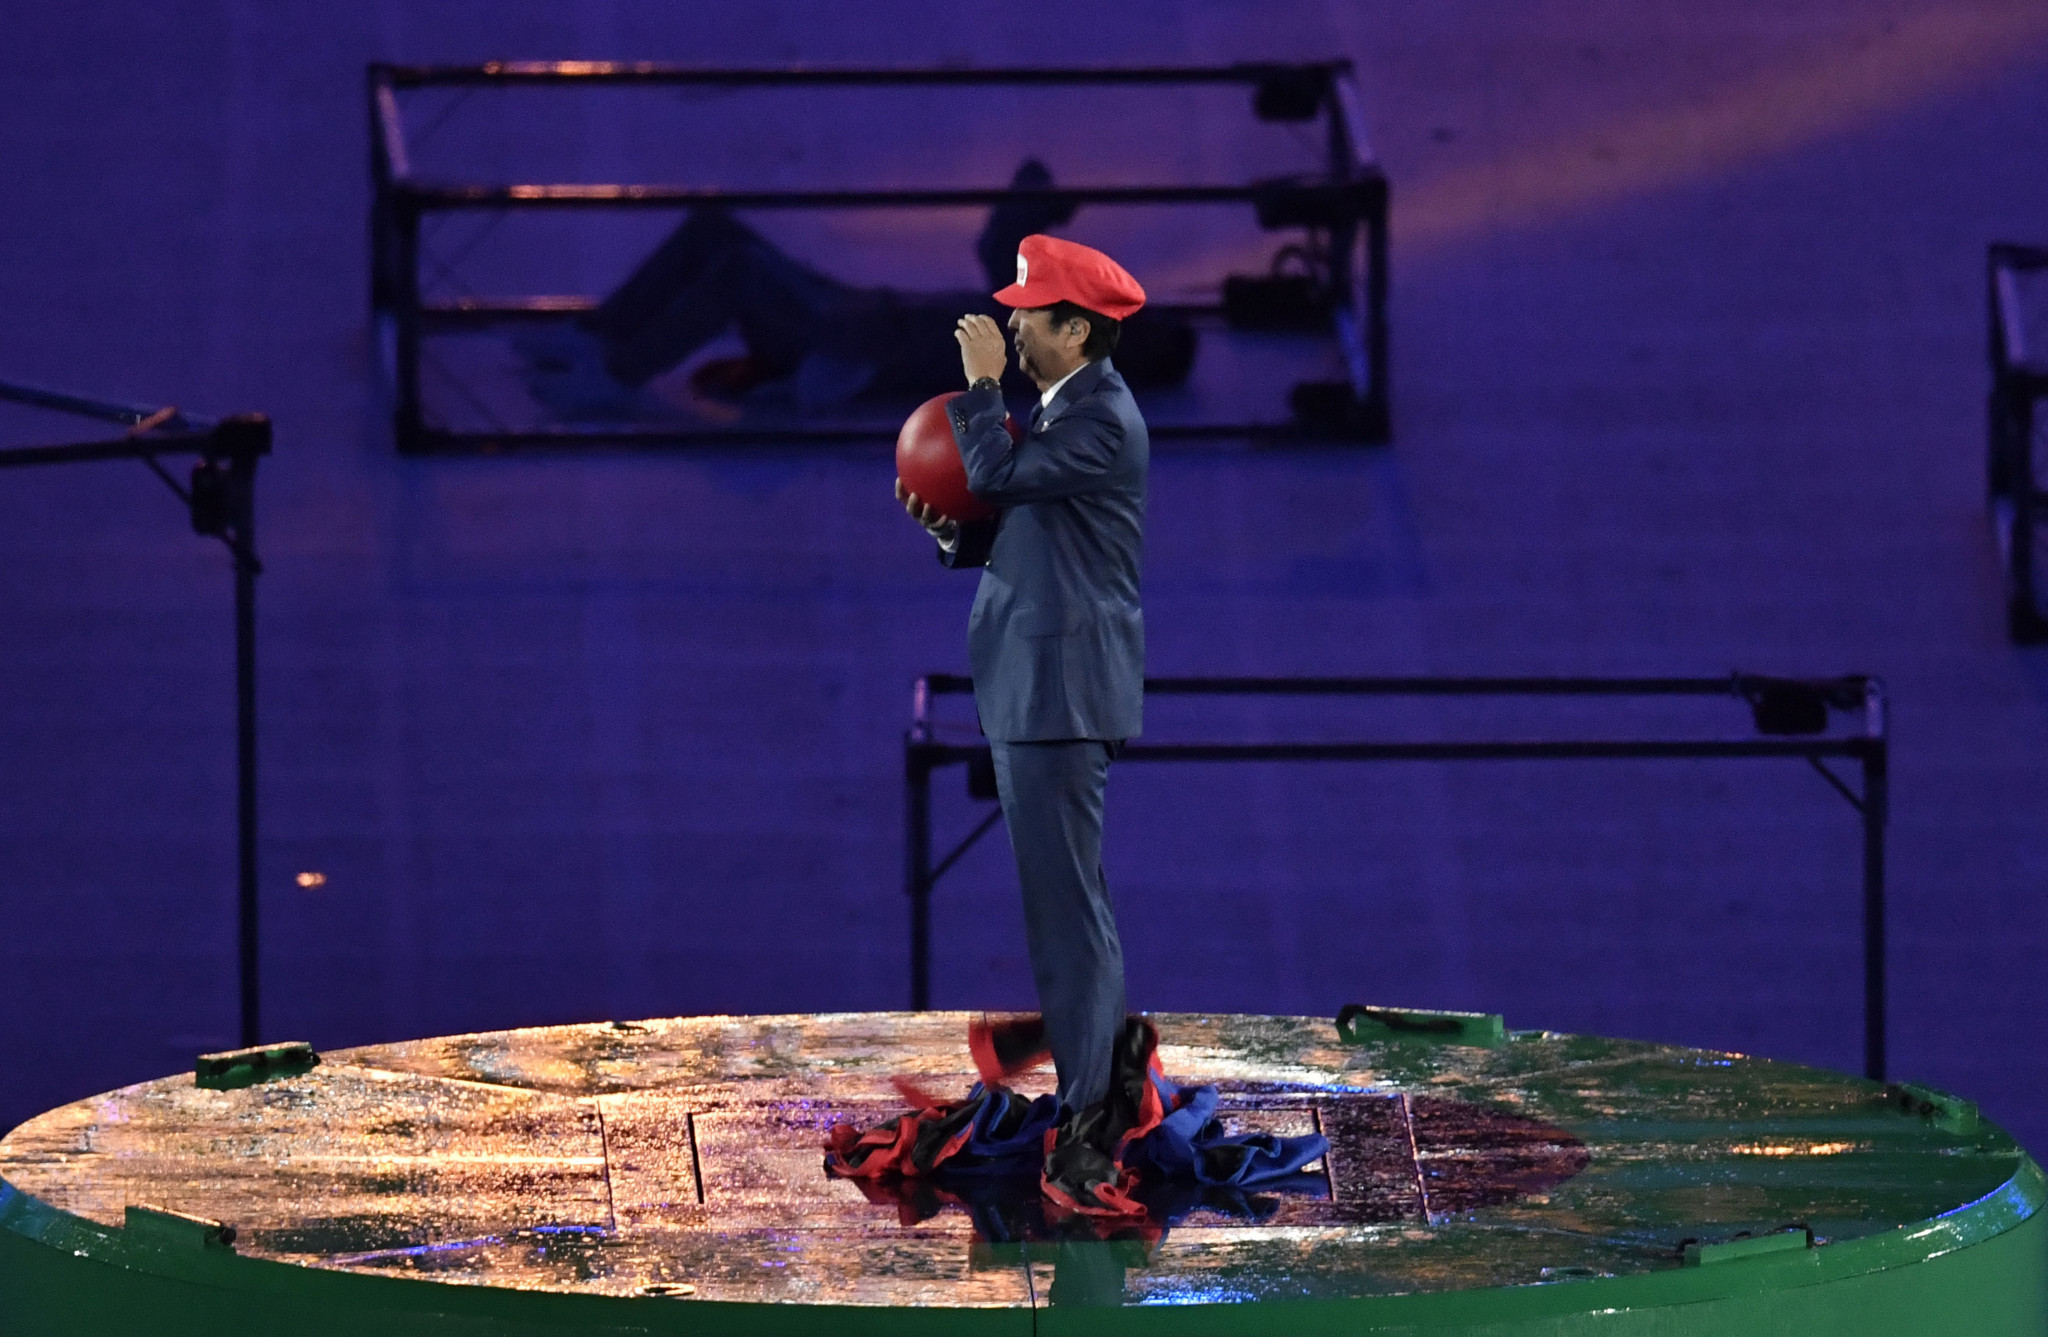 In the country home to Nintendo, there are rumours that Mario may appear in the Opening Ceremony to the Tokyo Olympics -just like the country's Prime Minister Shinzō Abe did during Rio 2016 ©Getty Images